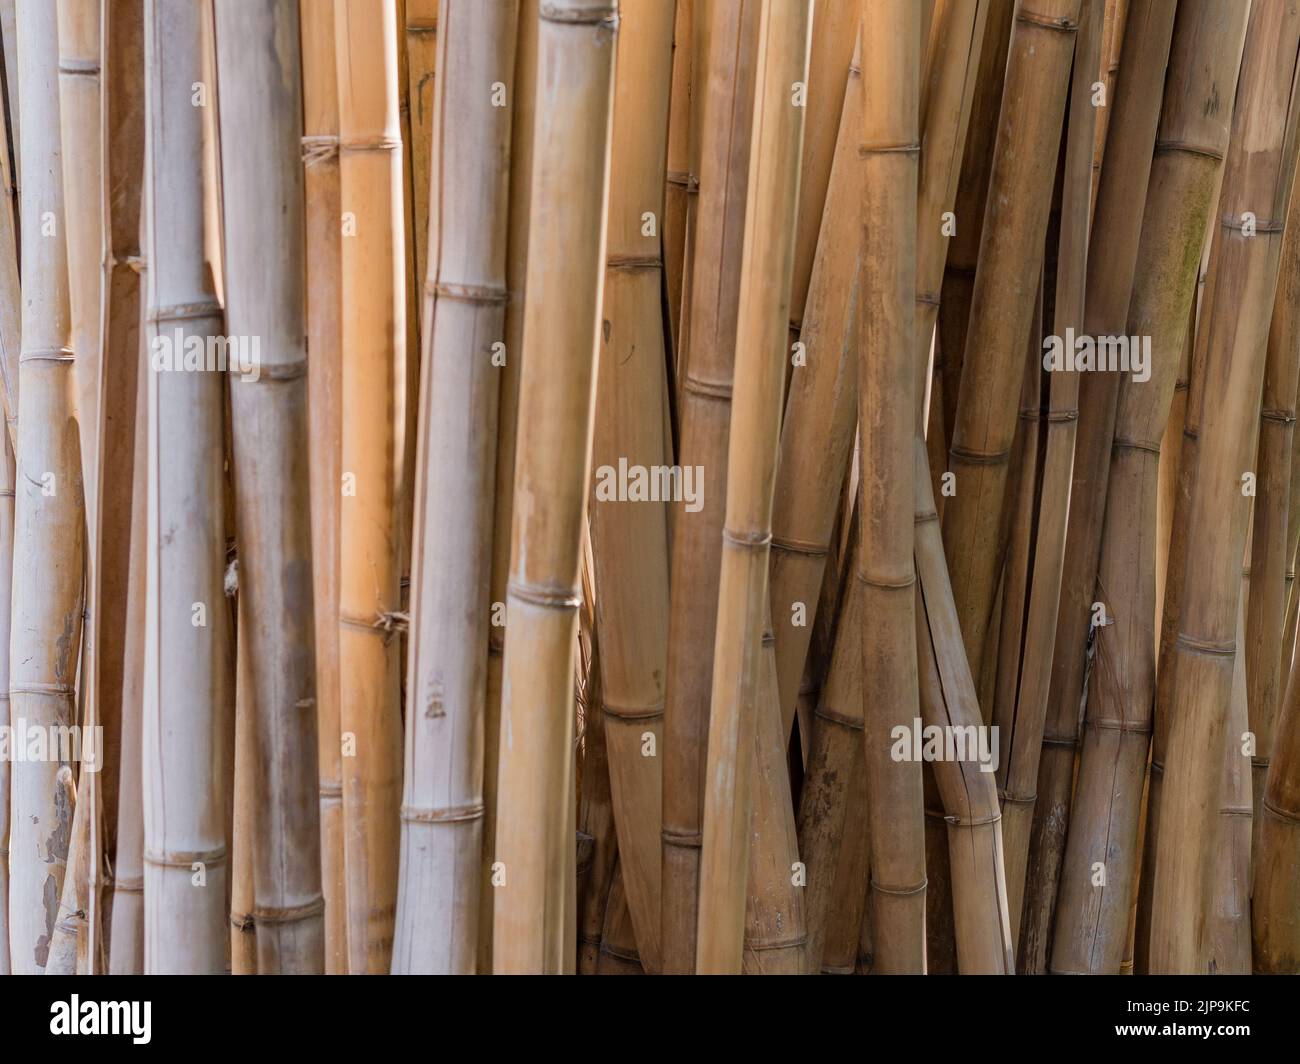 Horizontal background image of a stand of living bamboo, the plants' golden stems warm and peaceful. Stock Photo